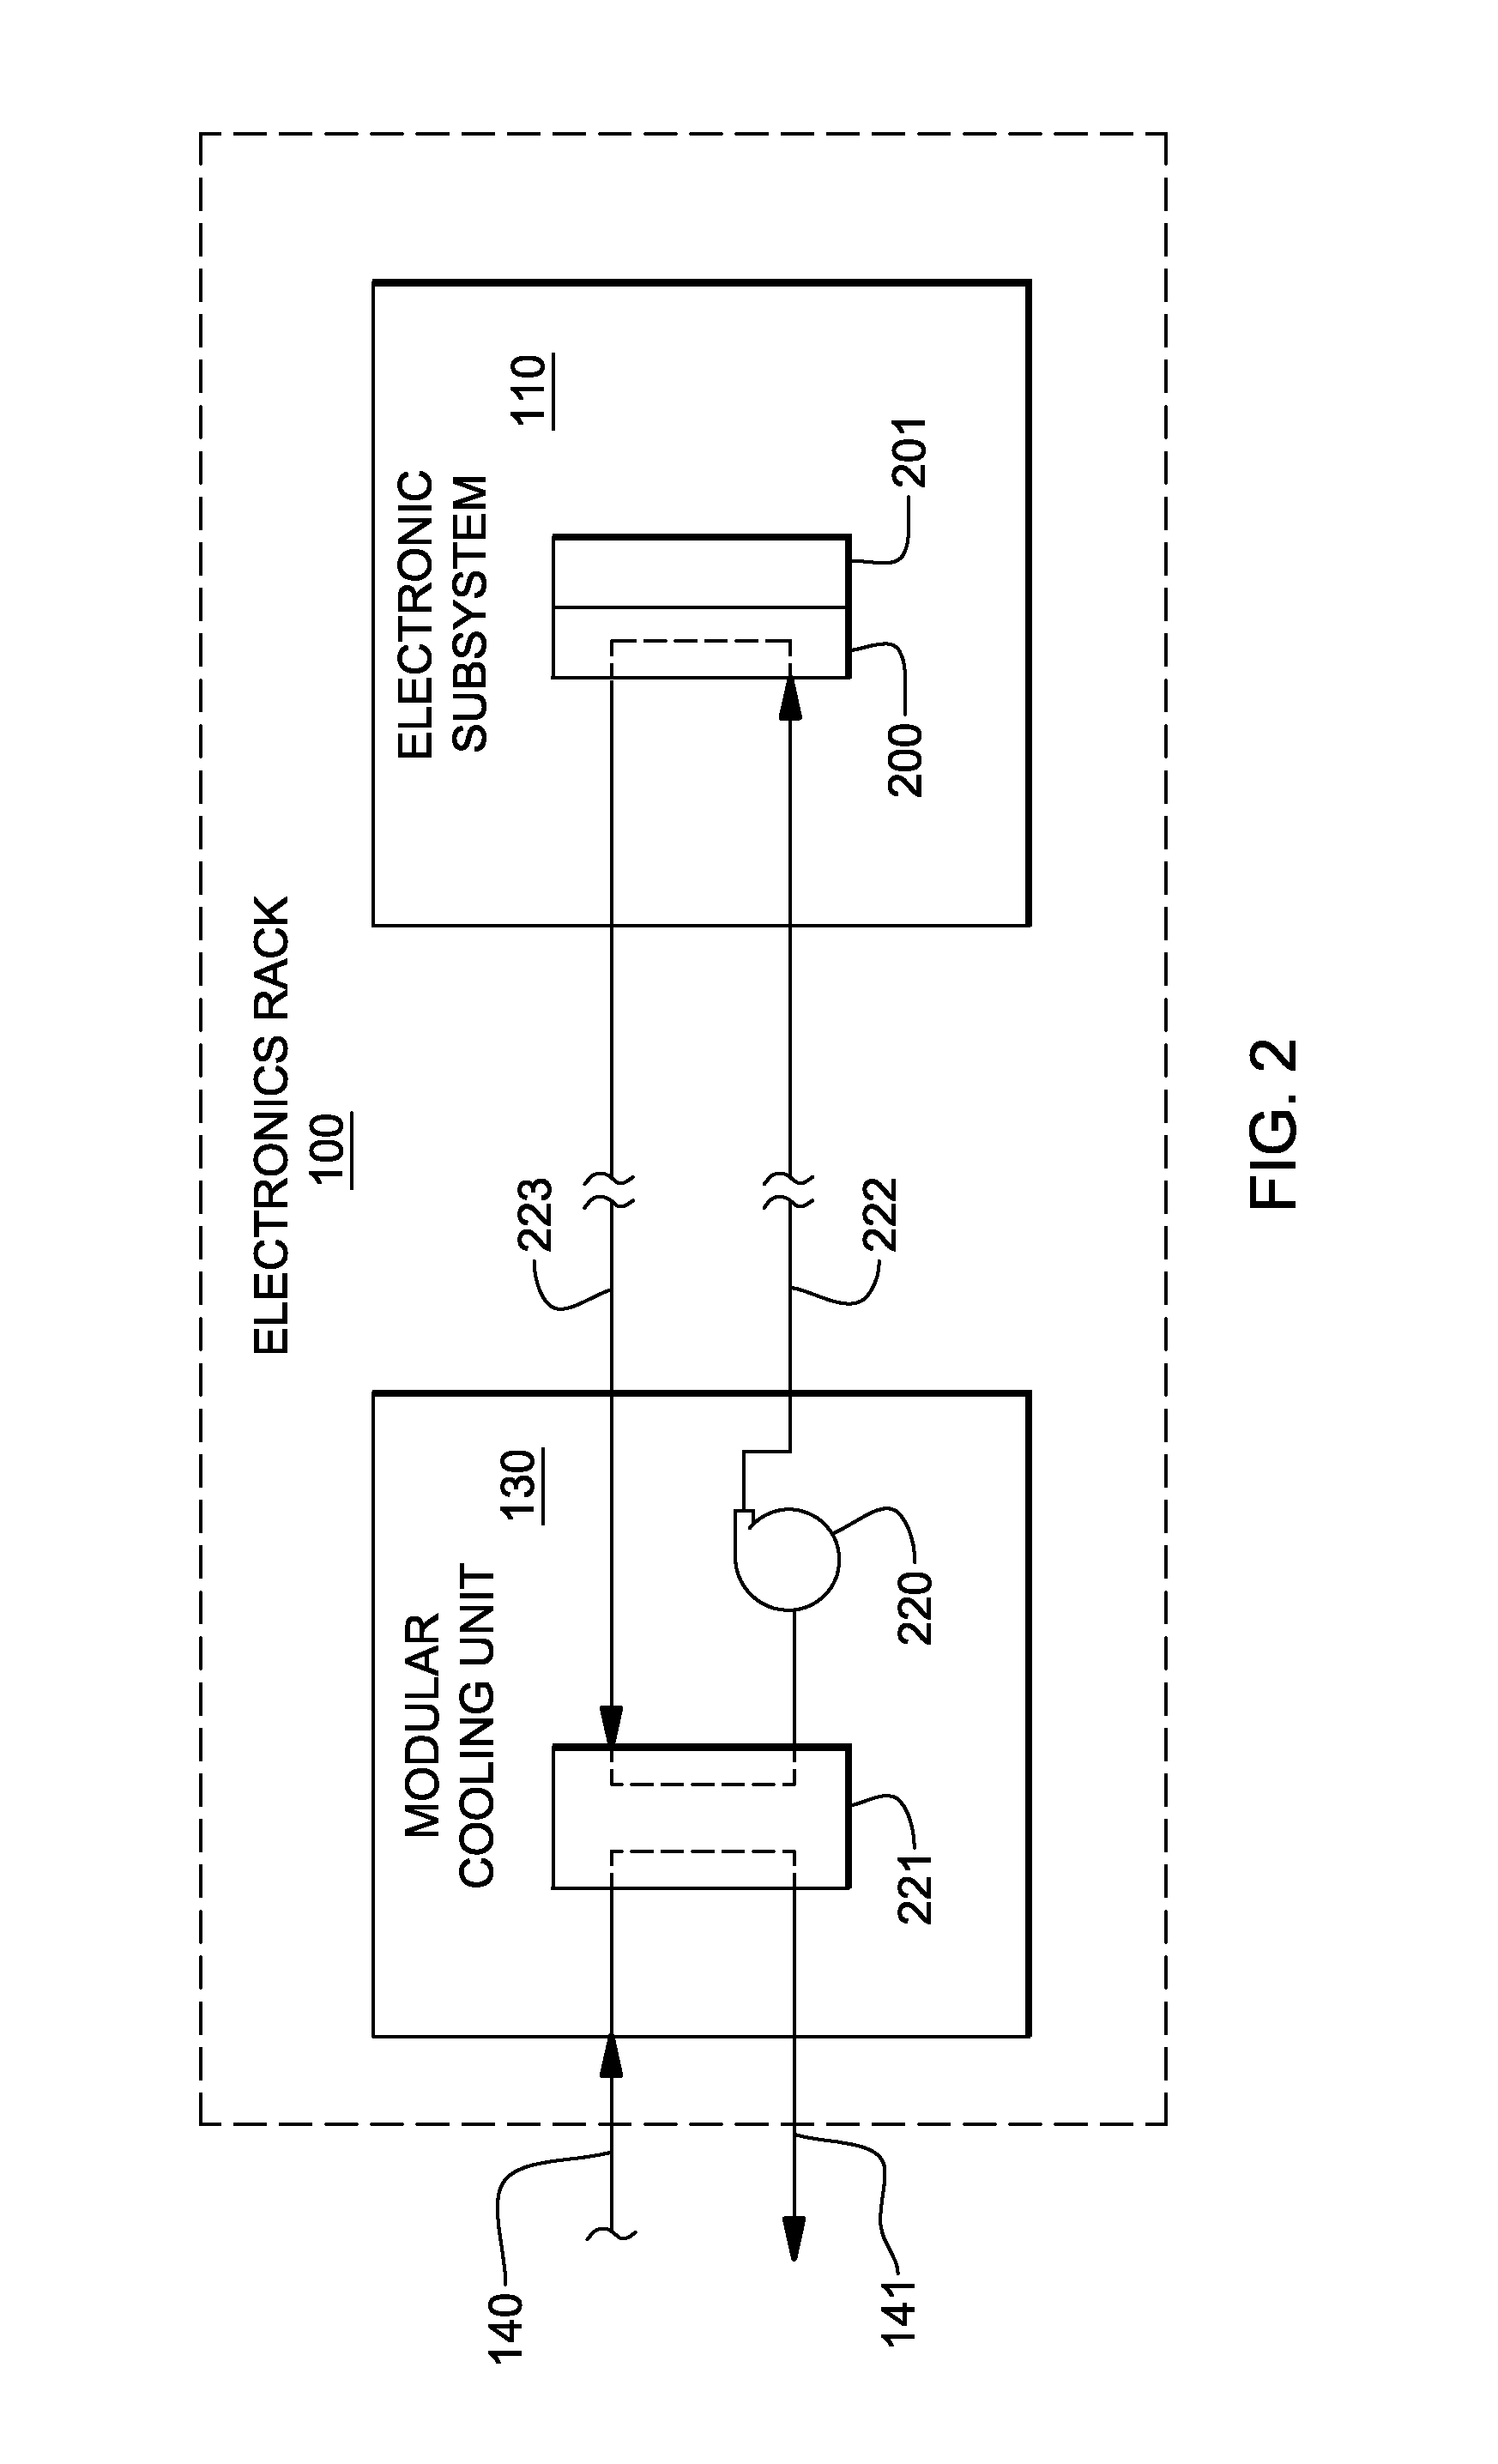 Valve controlled, node-level vapor condensation for two-phase heat sink(s)